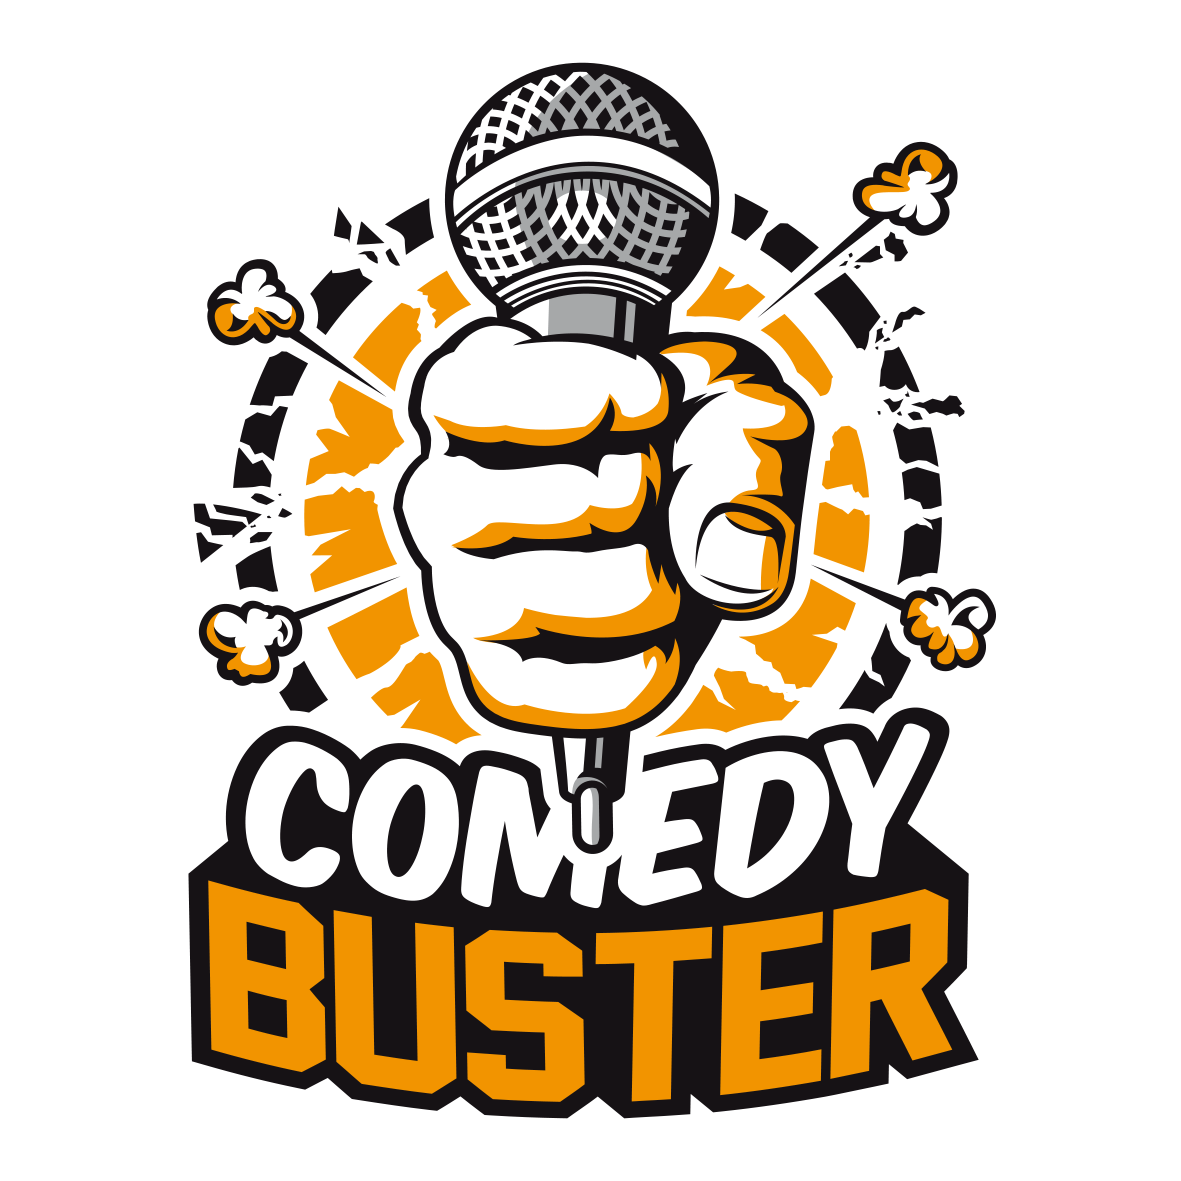 Comedy Buster